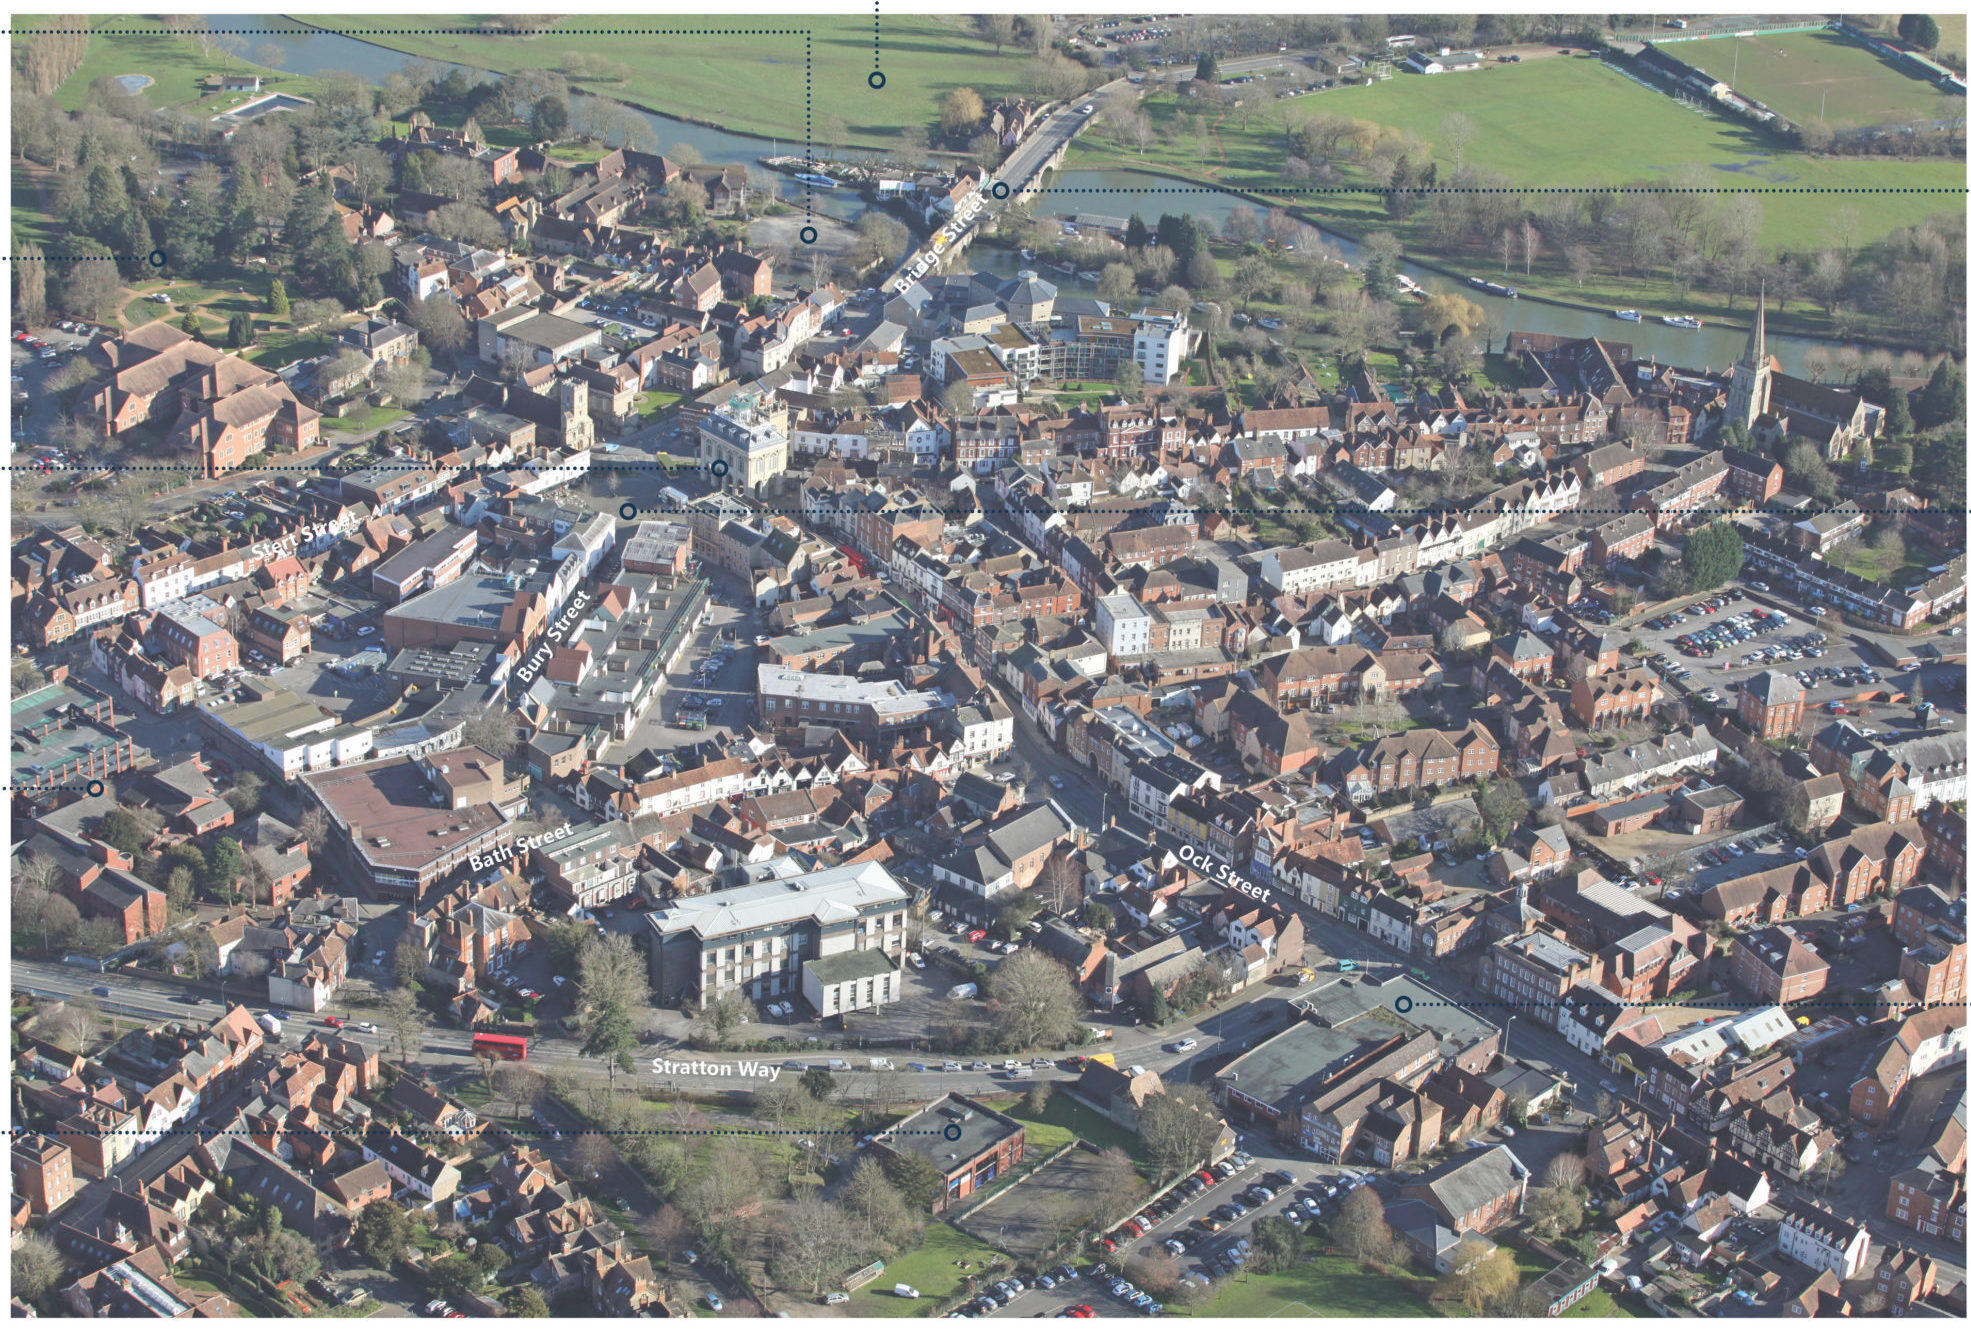 Aerial map of Abingdon town centre